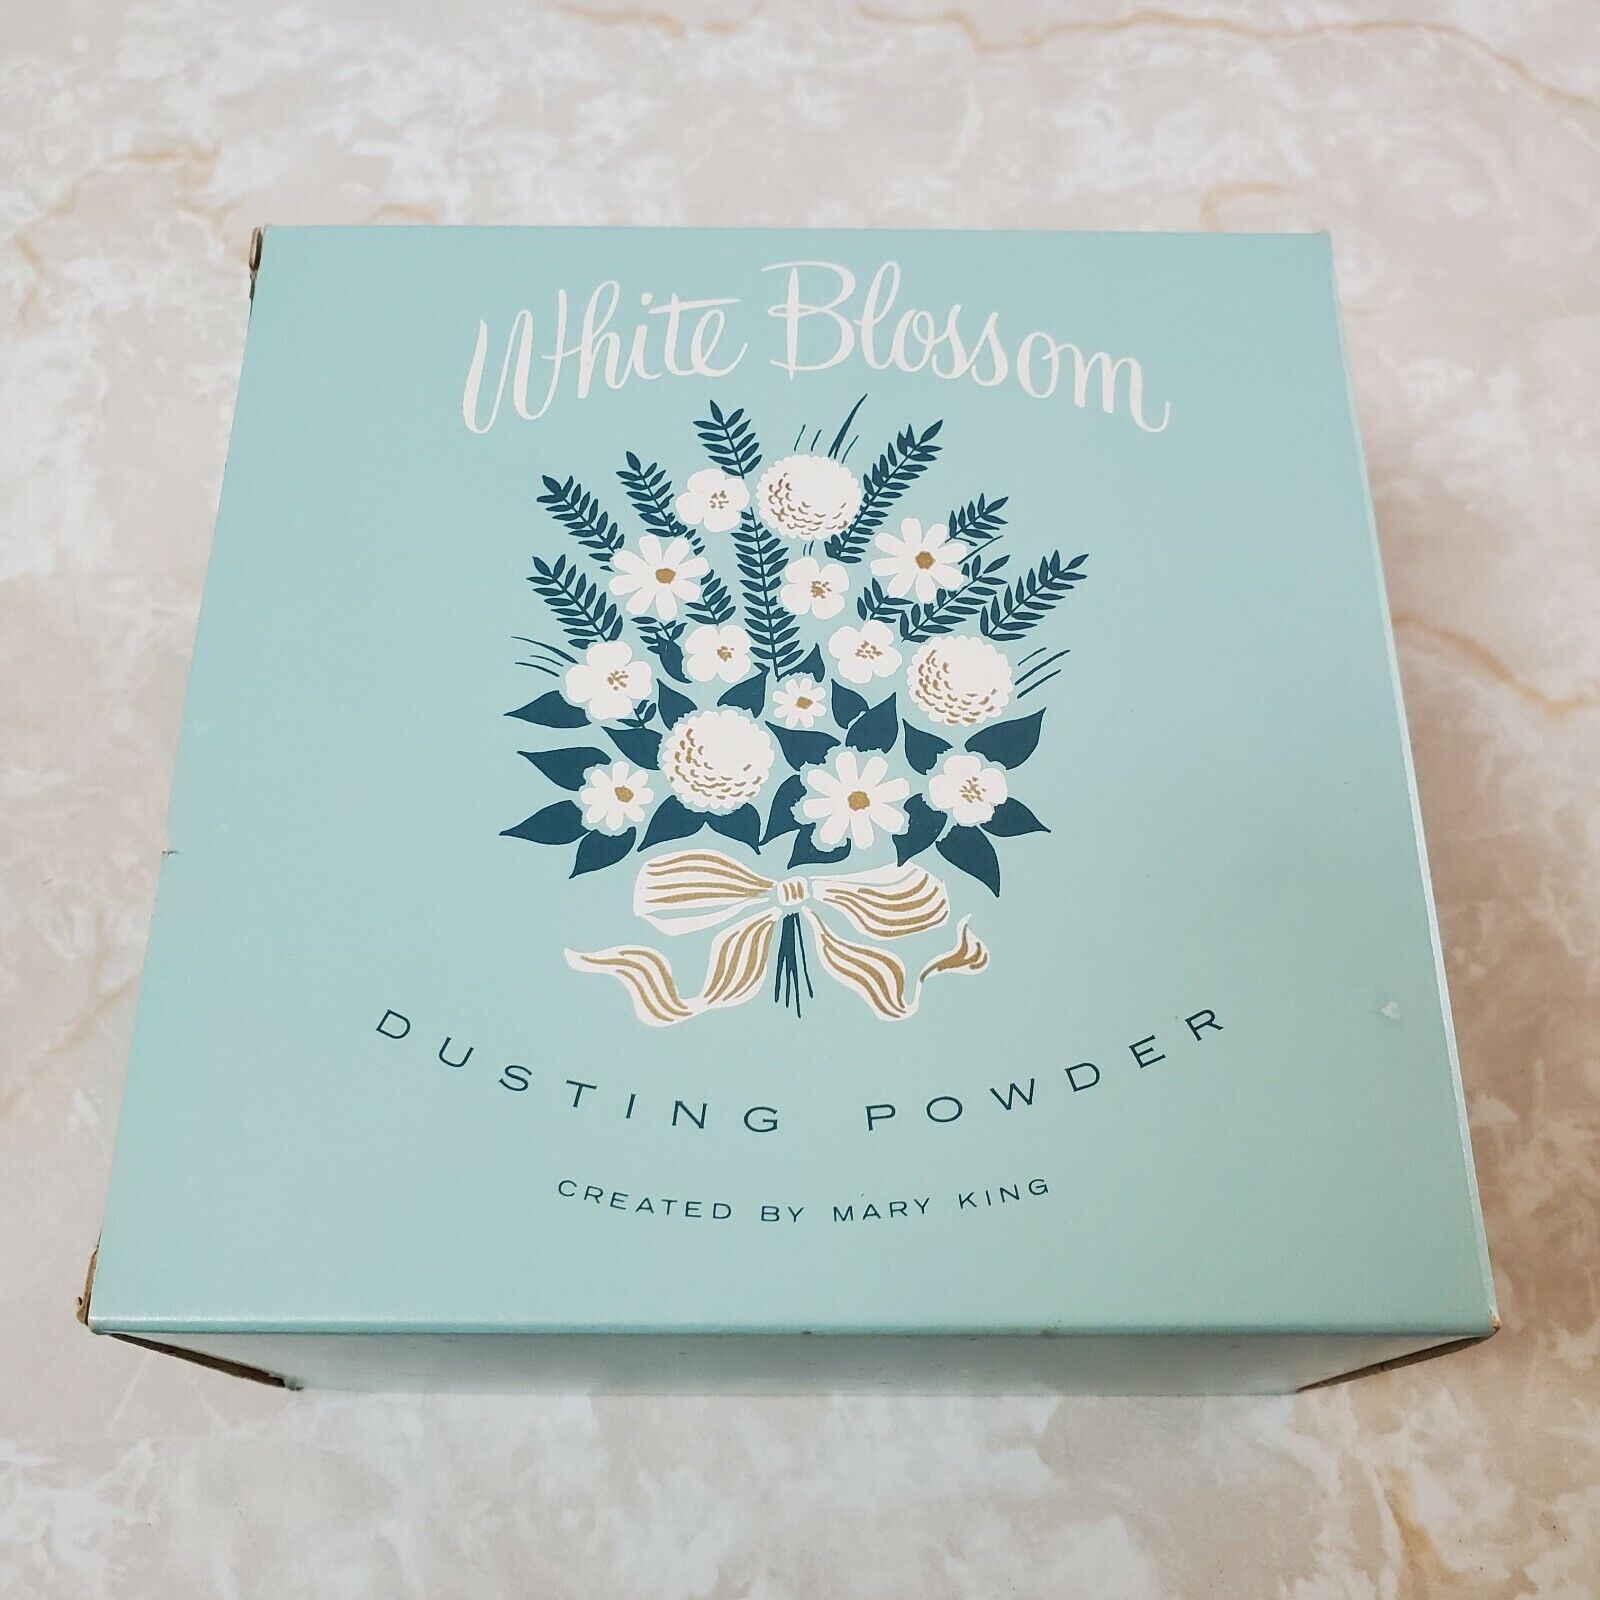 Vintage White Blossom Dusting Powder Created by Mary King Blue White w/ Box